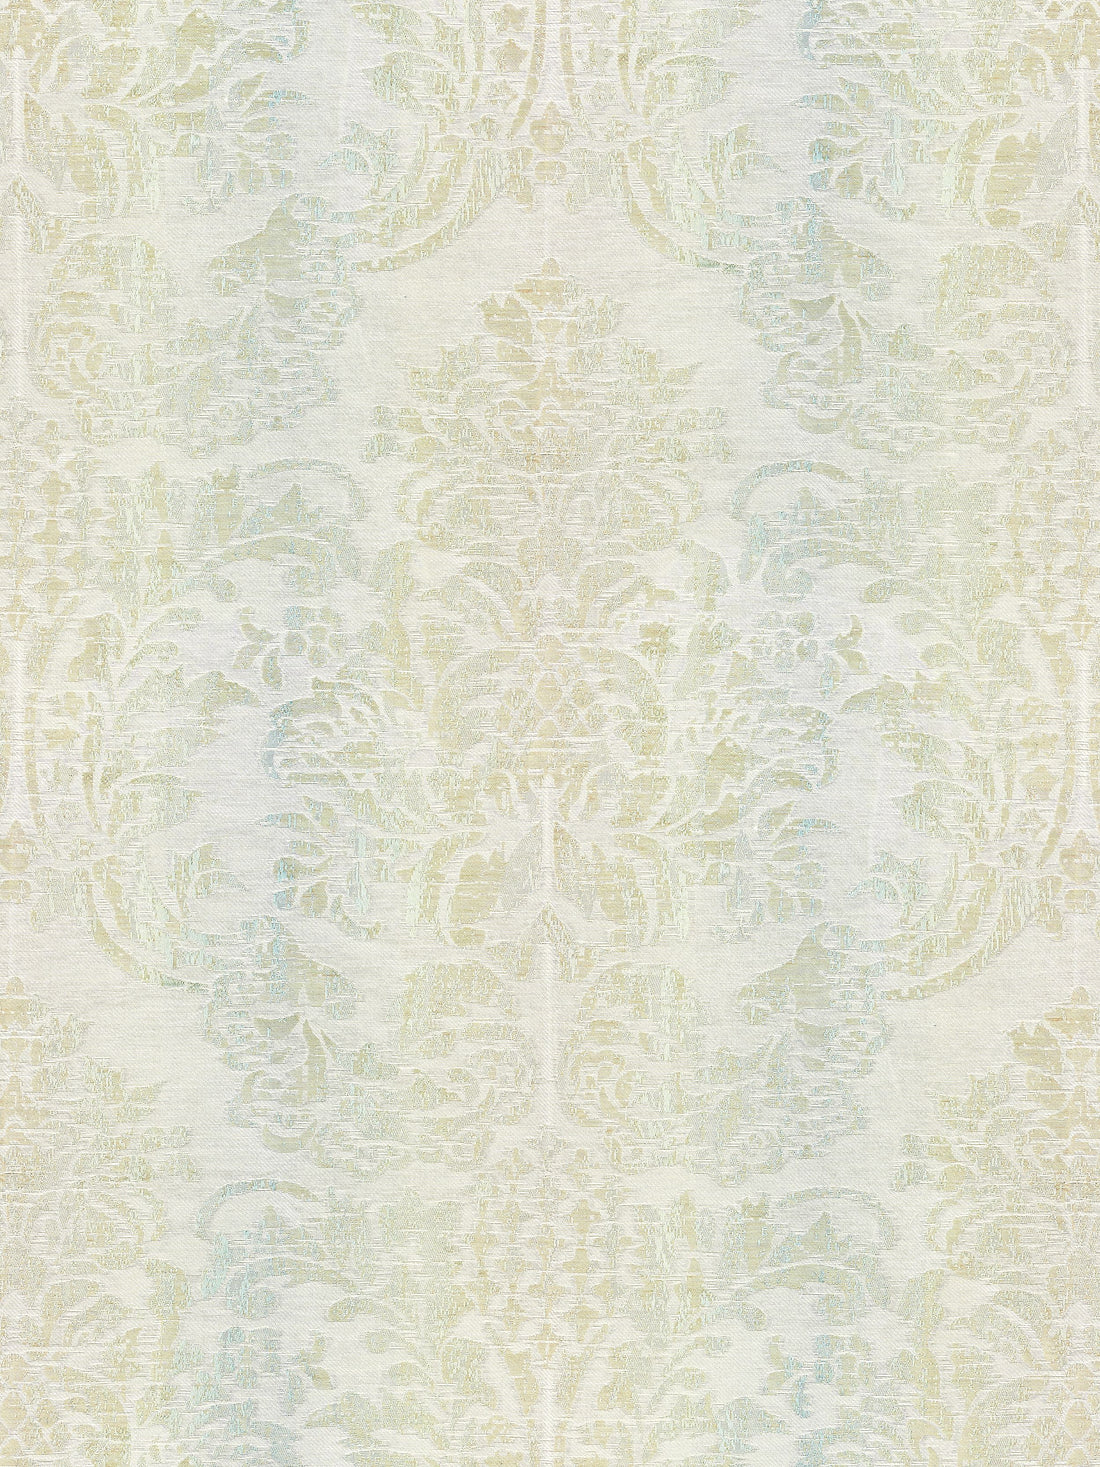 Sorrento Linen Damask fabric in mineral color - pattern number SC 000227093 - by Scalamandre in the Scalamandre Fabrics Book 1 collection